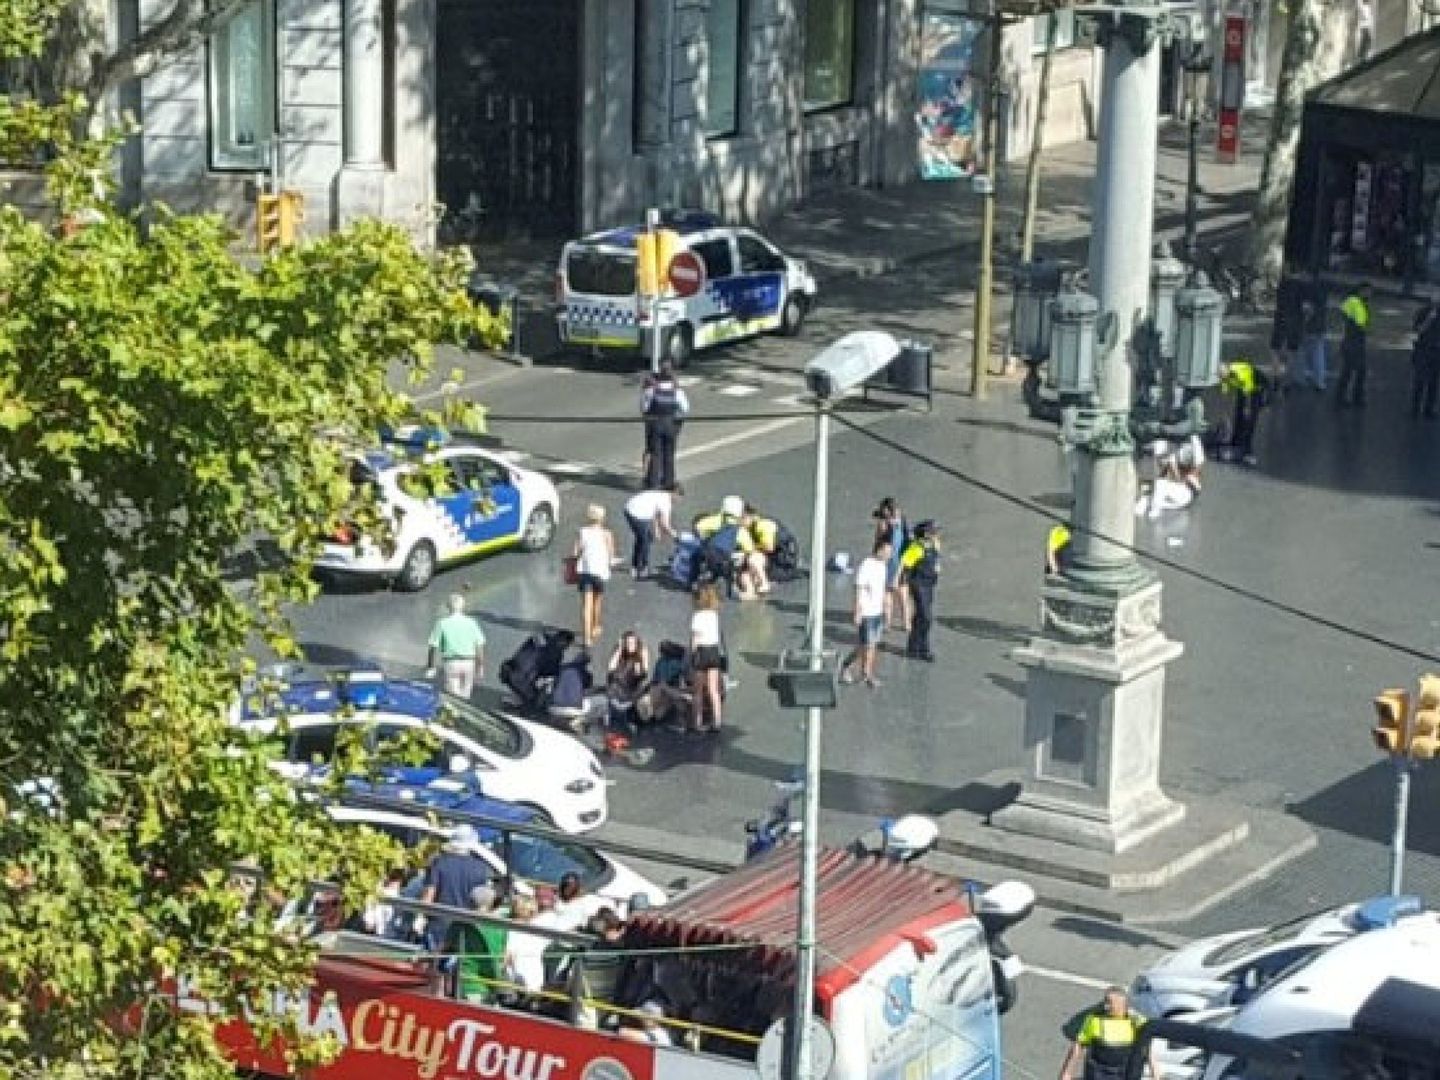 Police and emergency services attend to injured persons at the scene after a van crashed into pedestrians near the Las Ramblas avenue in central Barcelona, Spain August 17, 2017, in this still image from a video obtained from social media. Courtesy of  @Vil_Music via REUTERS ATTENTION EDITORS - THIS IMAGE HAS BEEN SUPPLIED BY A THIRD PARTY. NO RESALES. NO ARCHIVES. MANDATORY ON-SCREEN CREDIT.